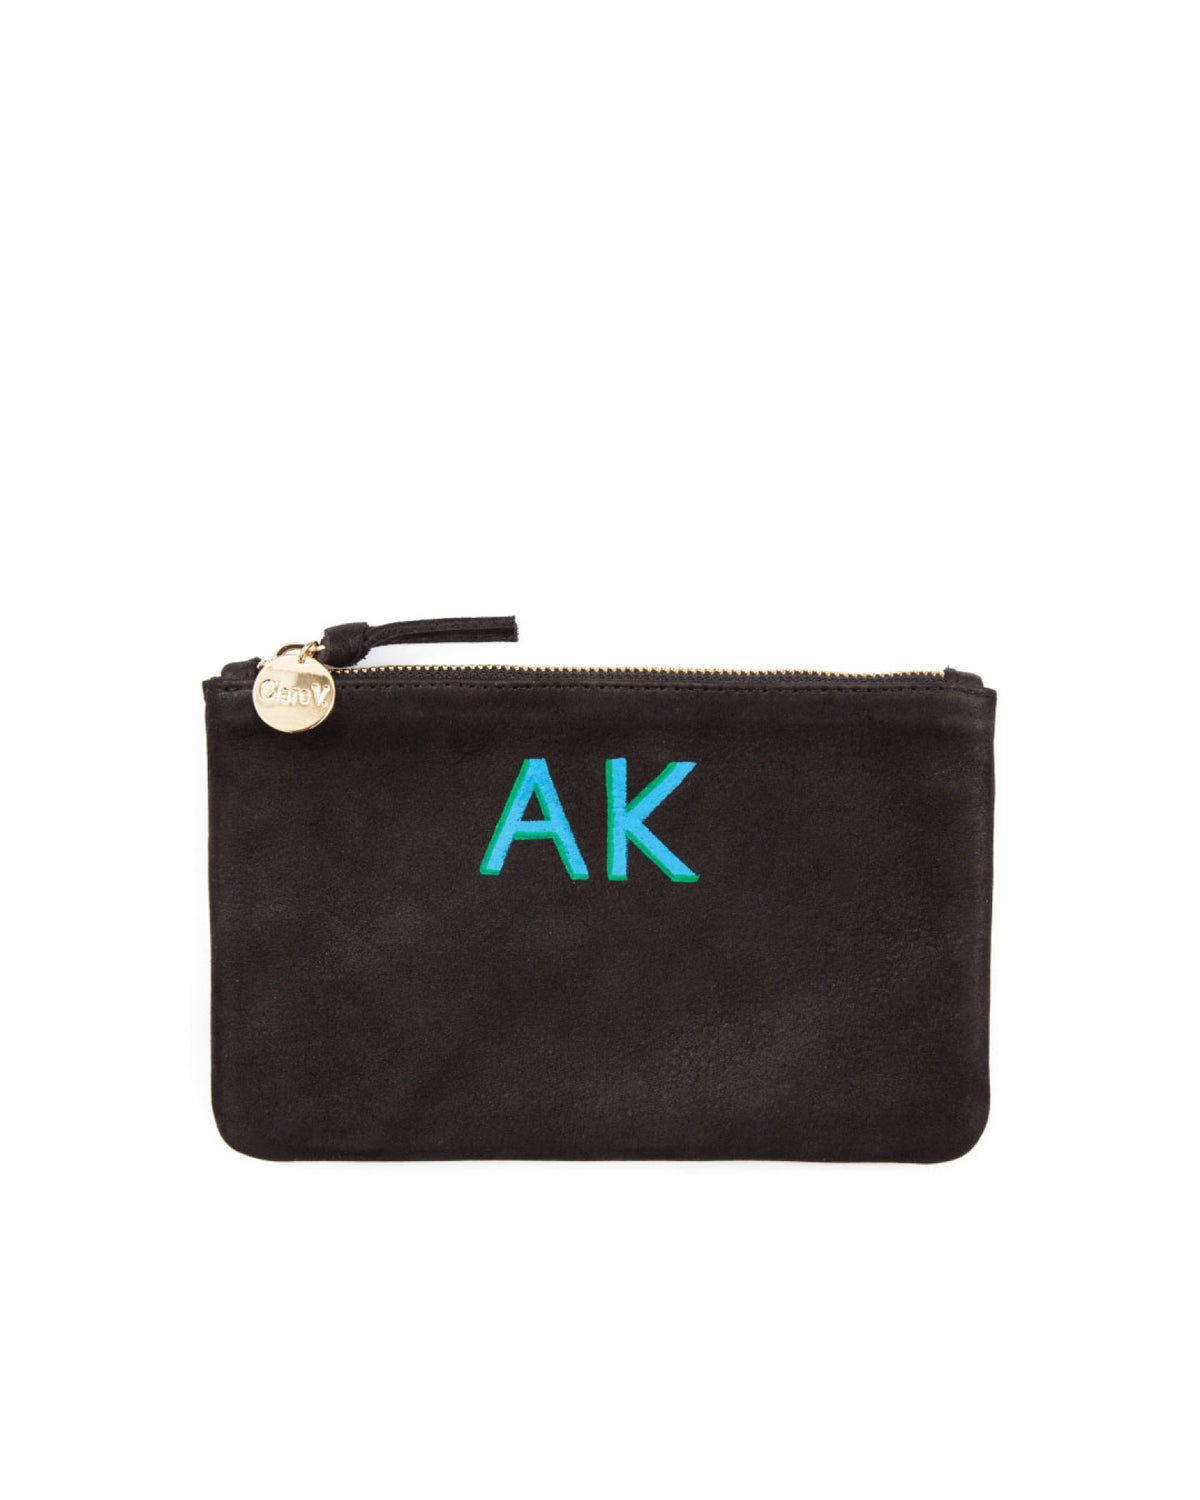 Black Nubuck Wallet Clutch with 1 Inch Hand Painted Letters On The Top Center.